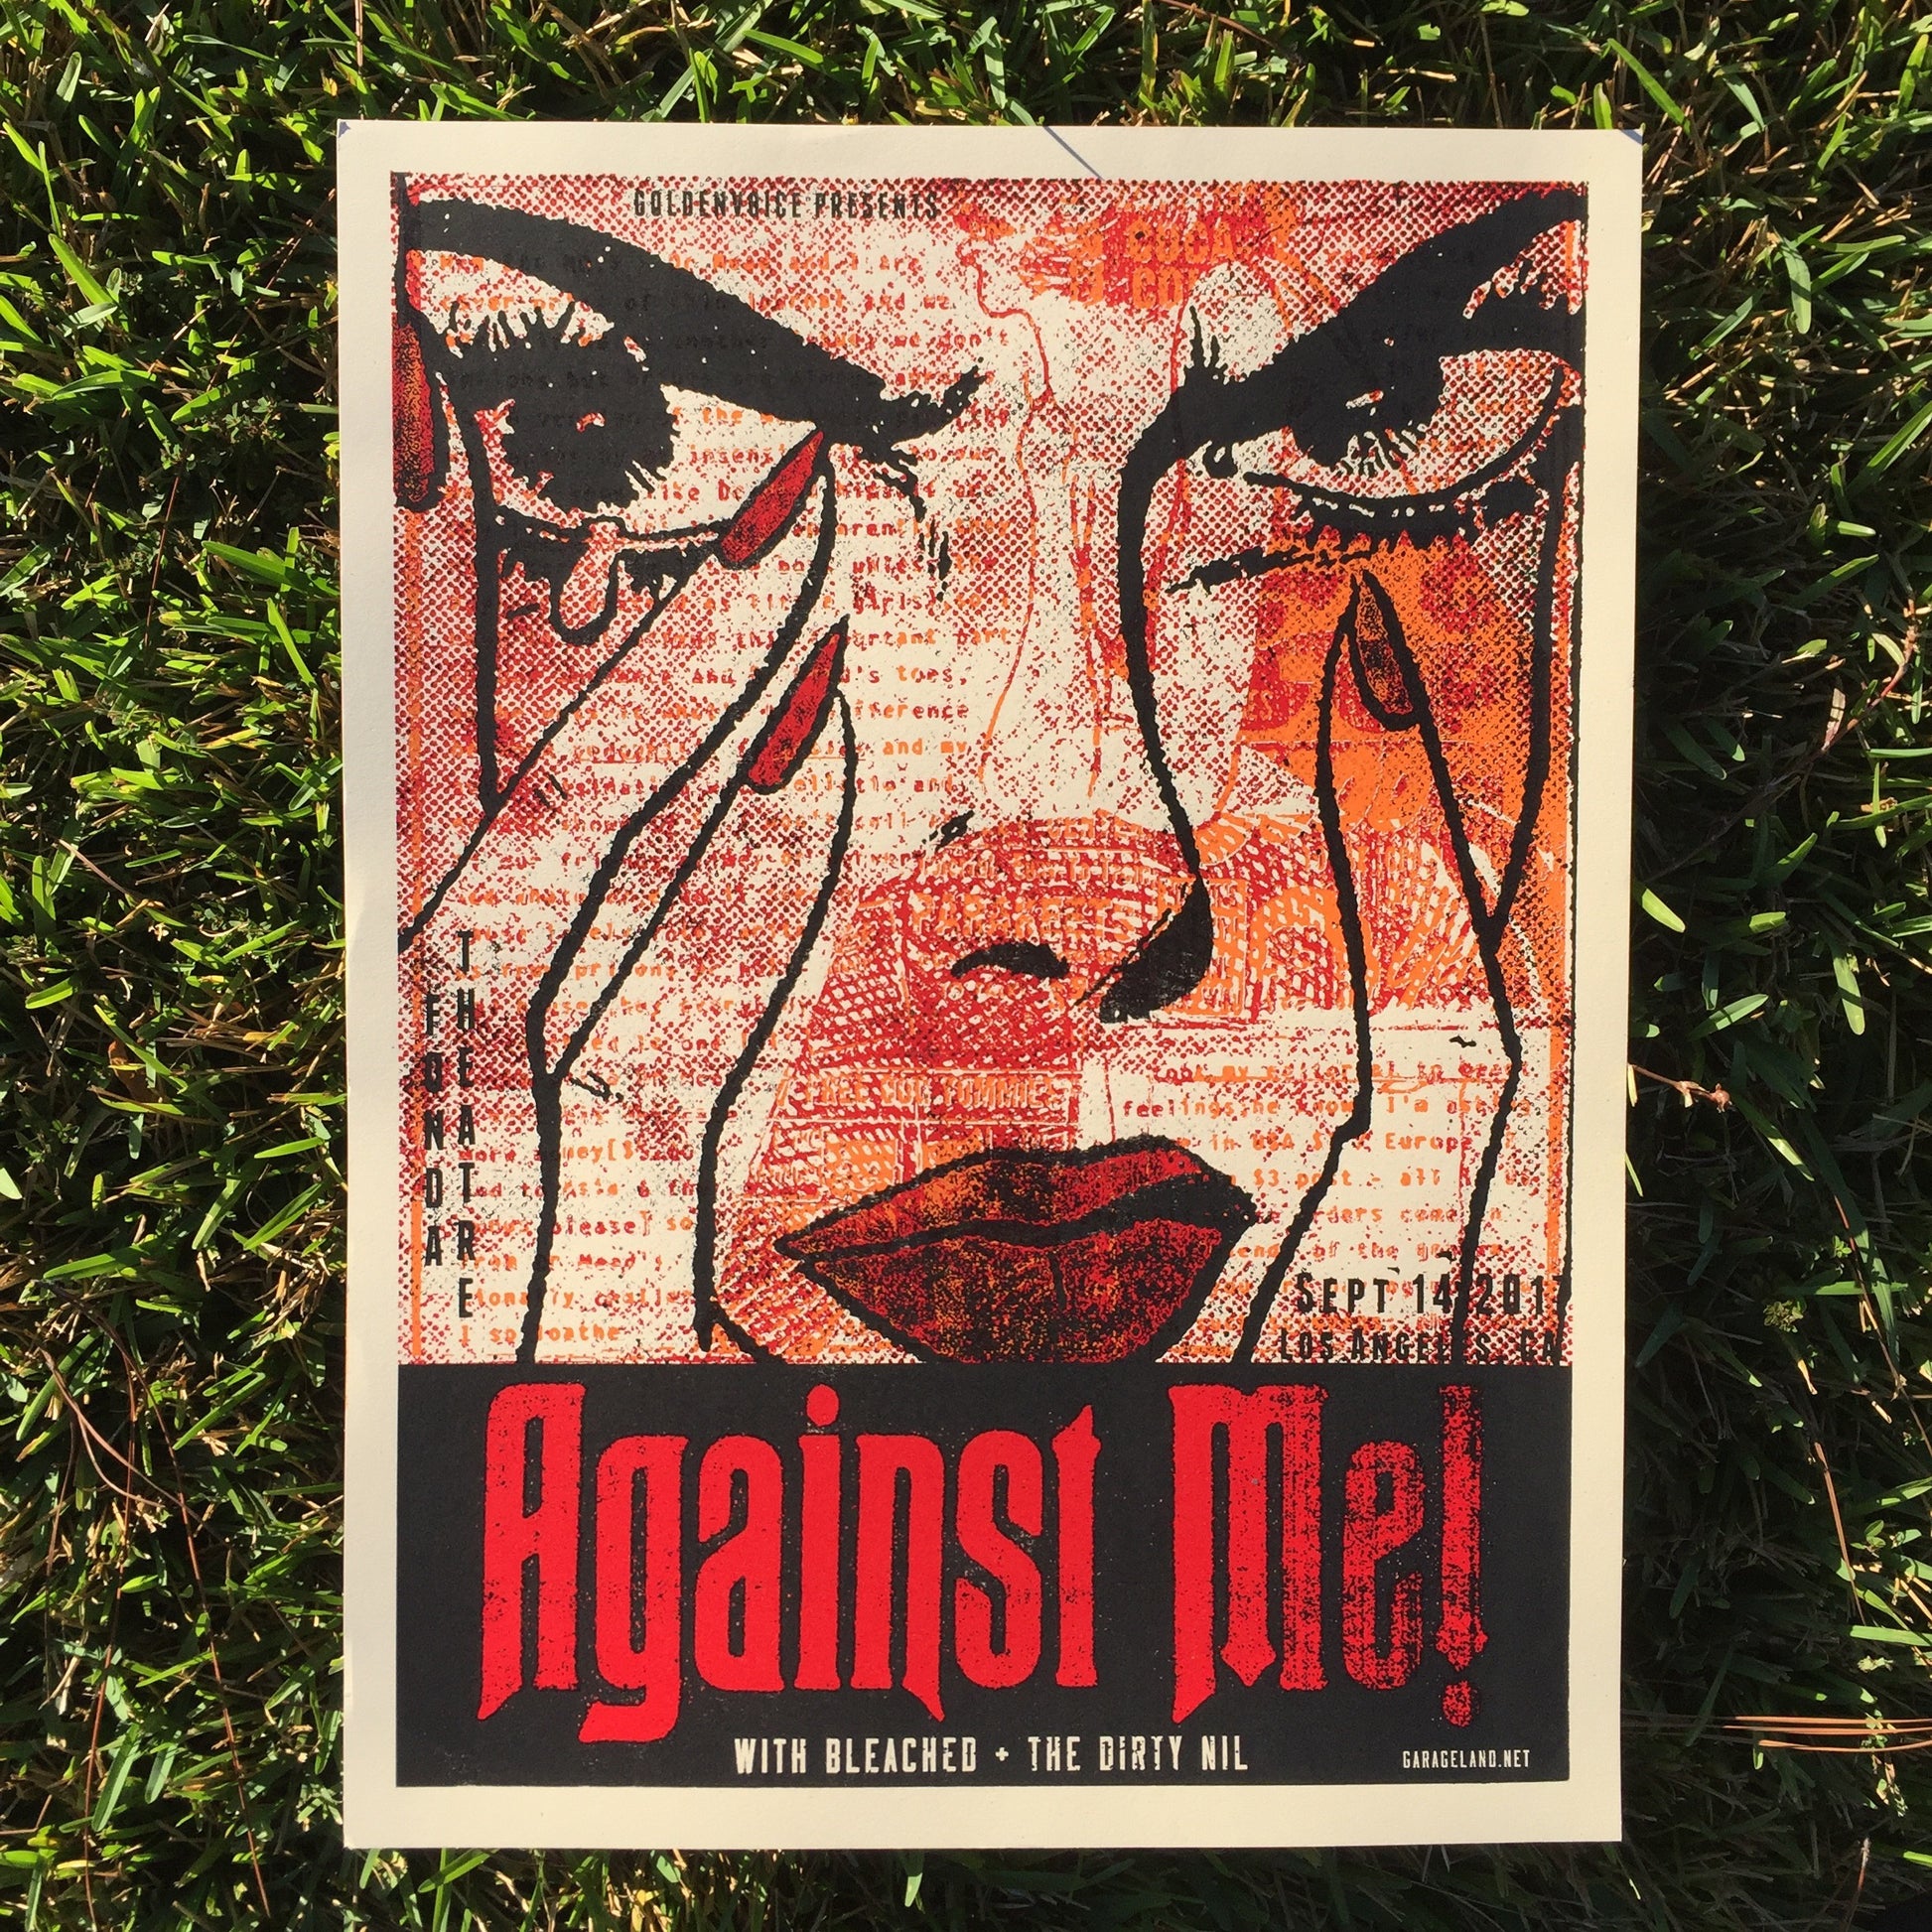 Against Me! MYSTERY TOUR POSTER BUNDLE